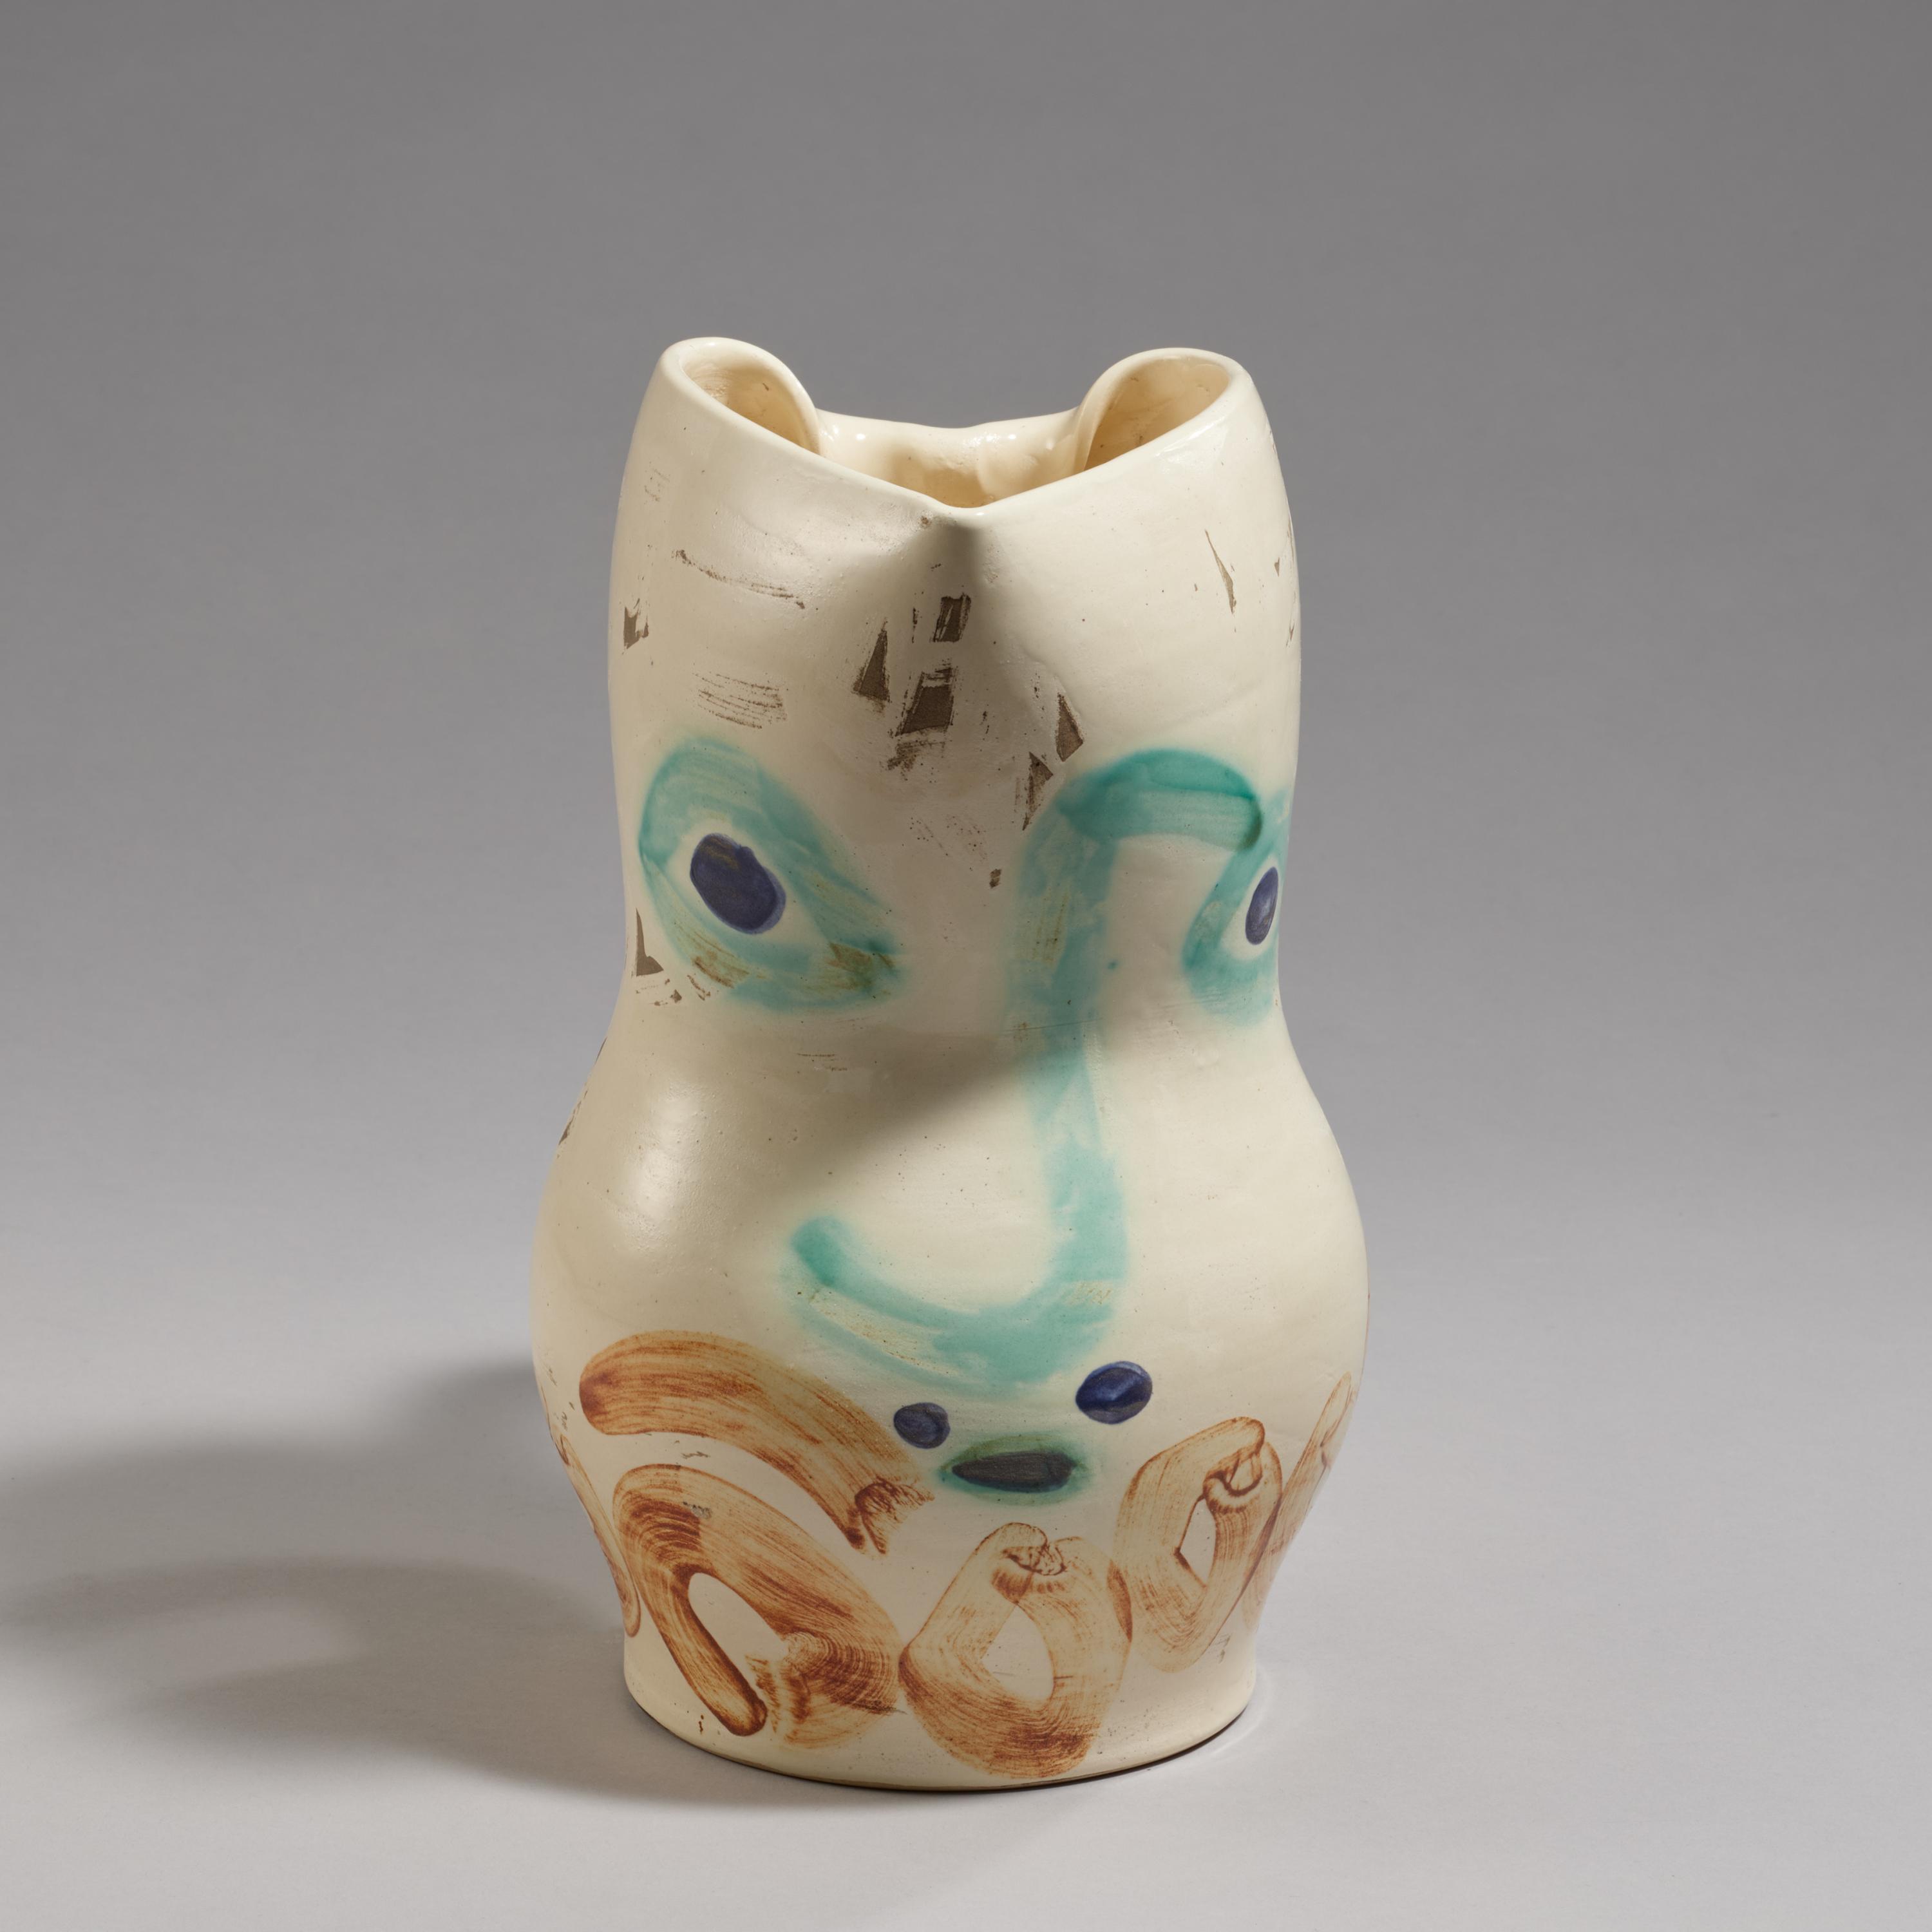 Pablo Picasso Ceramics: Face With Circles - Image 4 of 5